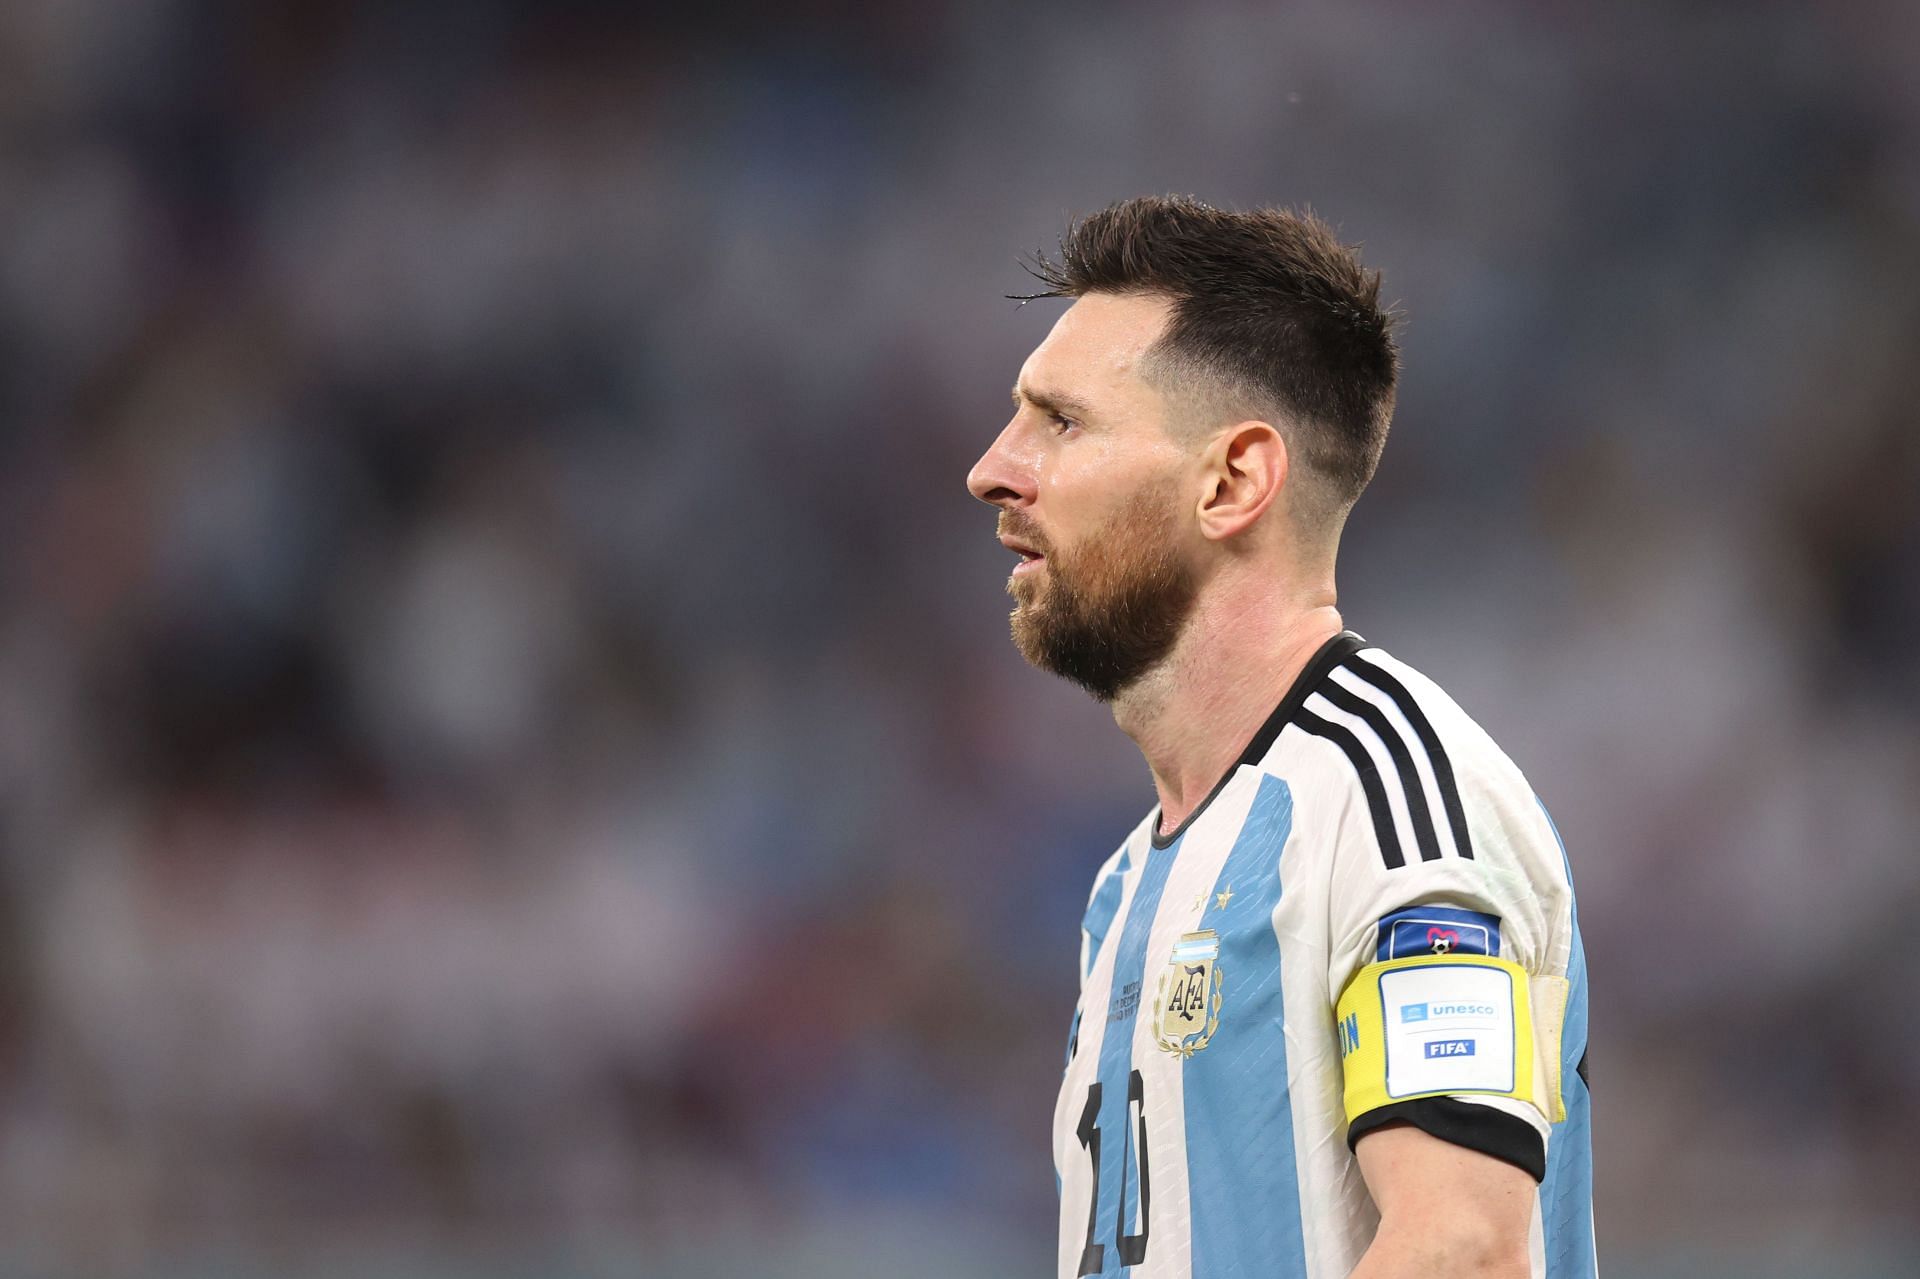 Lionel Messi has been in a rich vein of form at the 2022 World Cup.